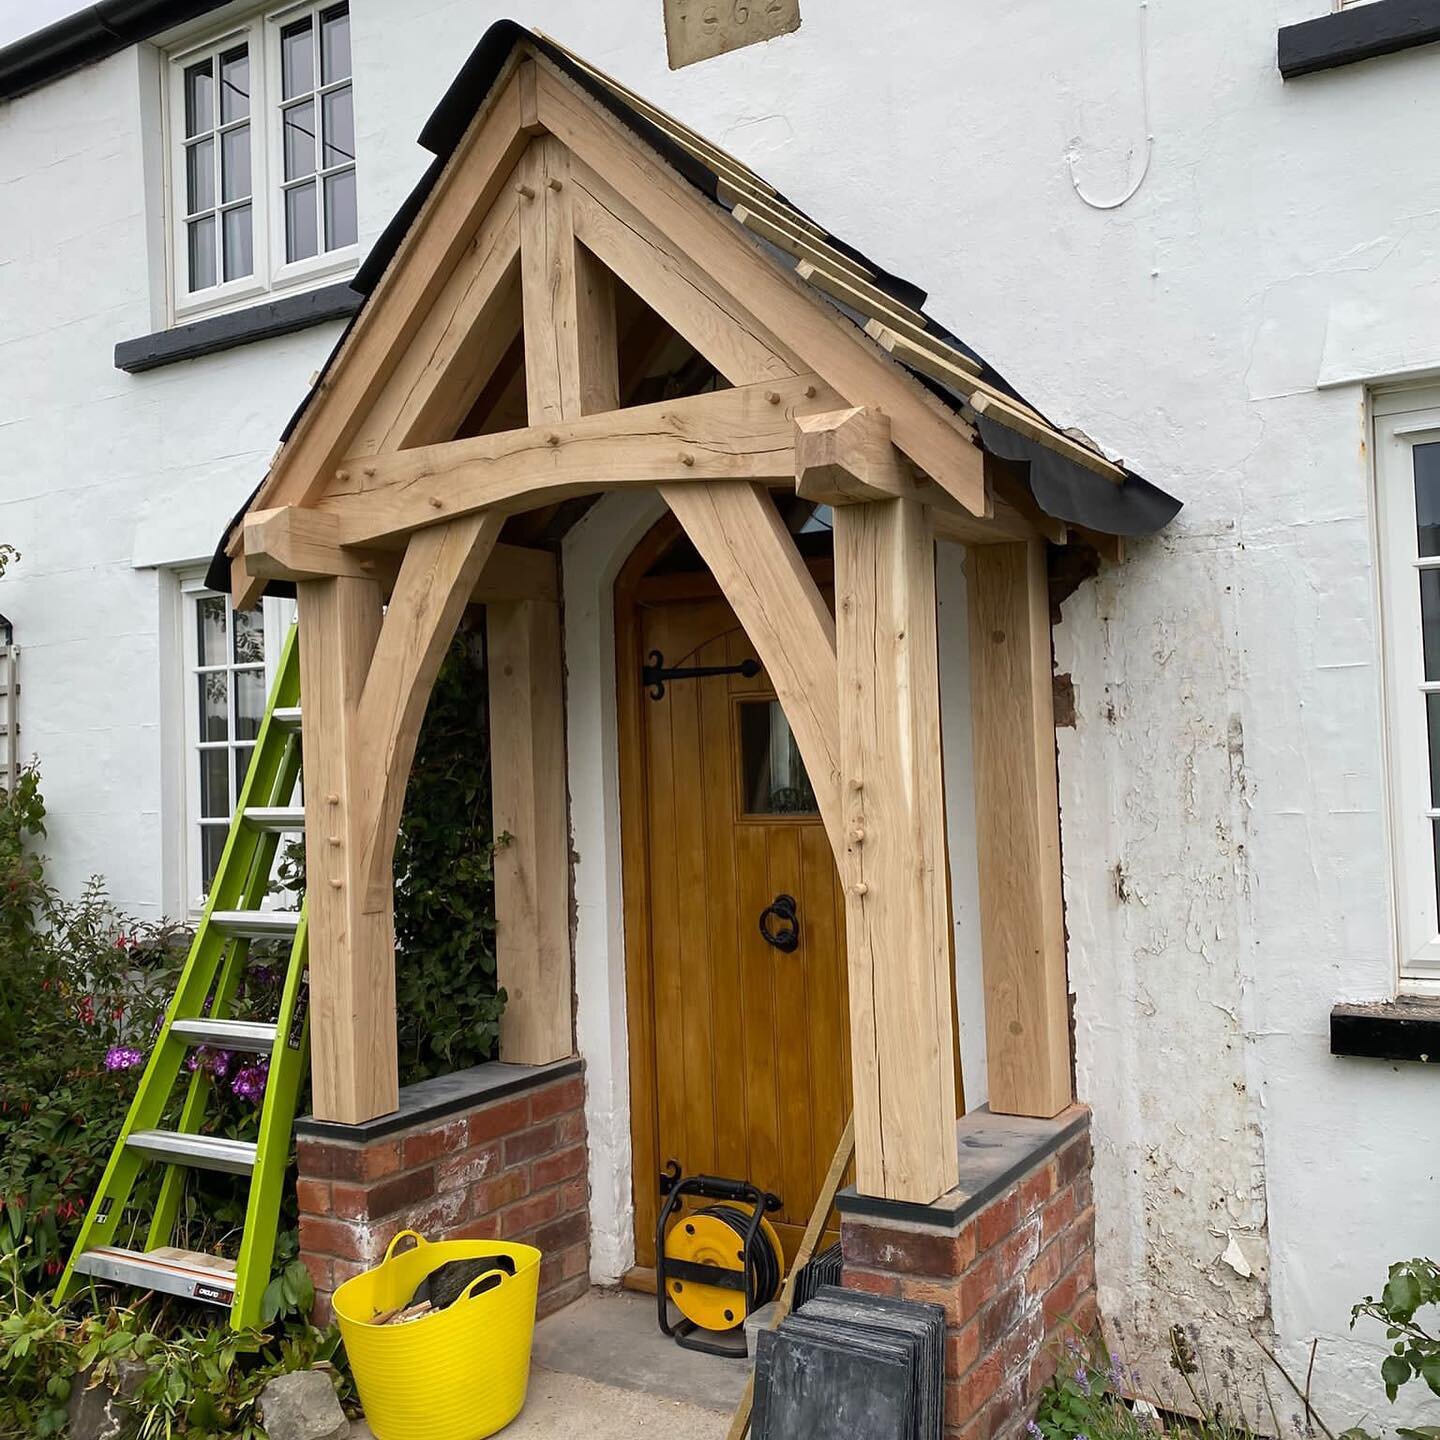 Day 1 on site, very please with this oak porch. Just the roof to finish off tomorrow.